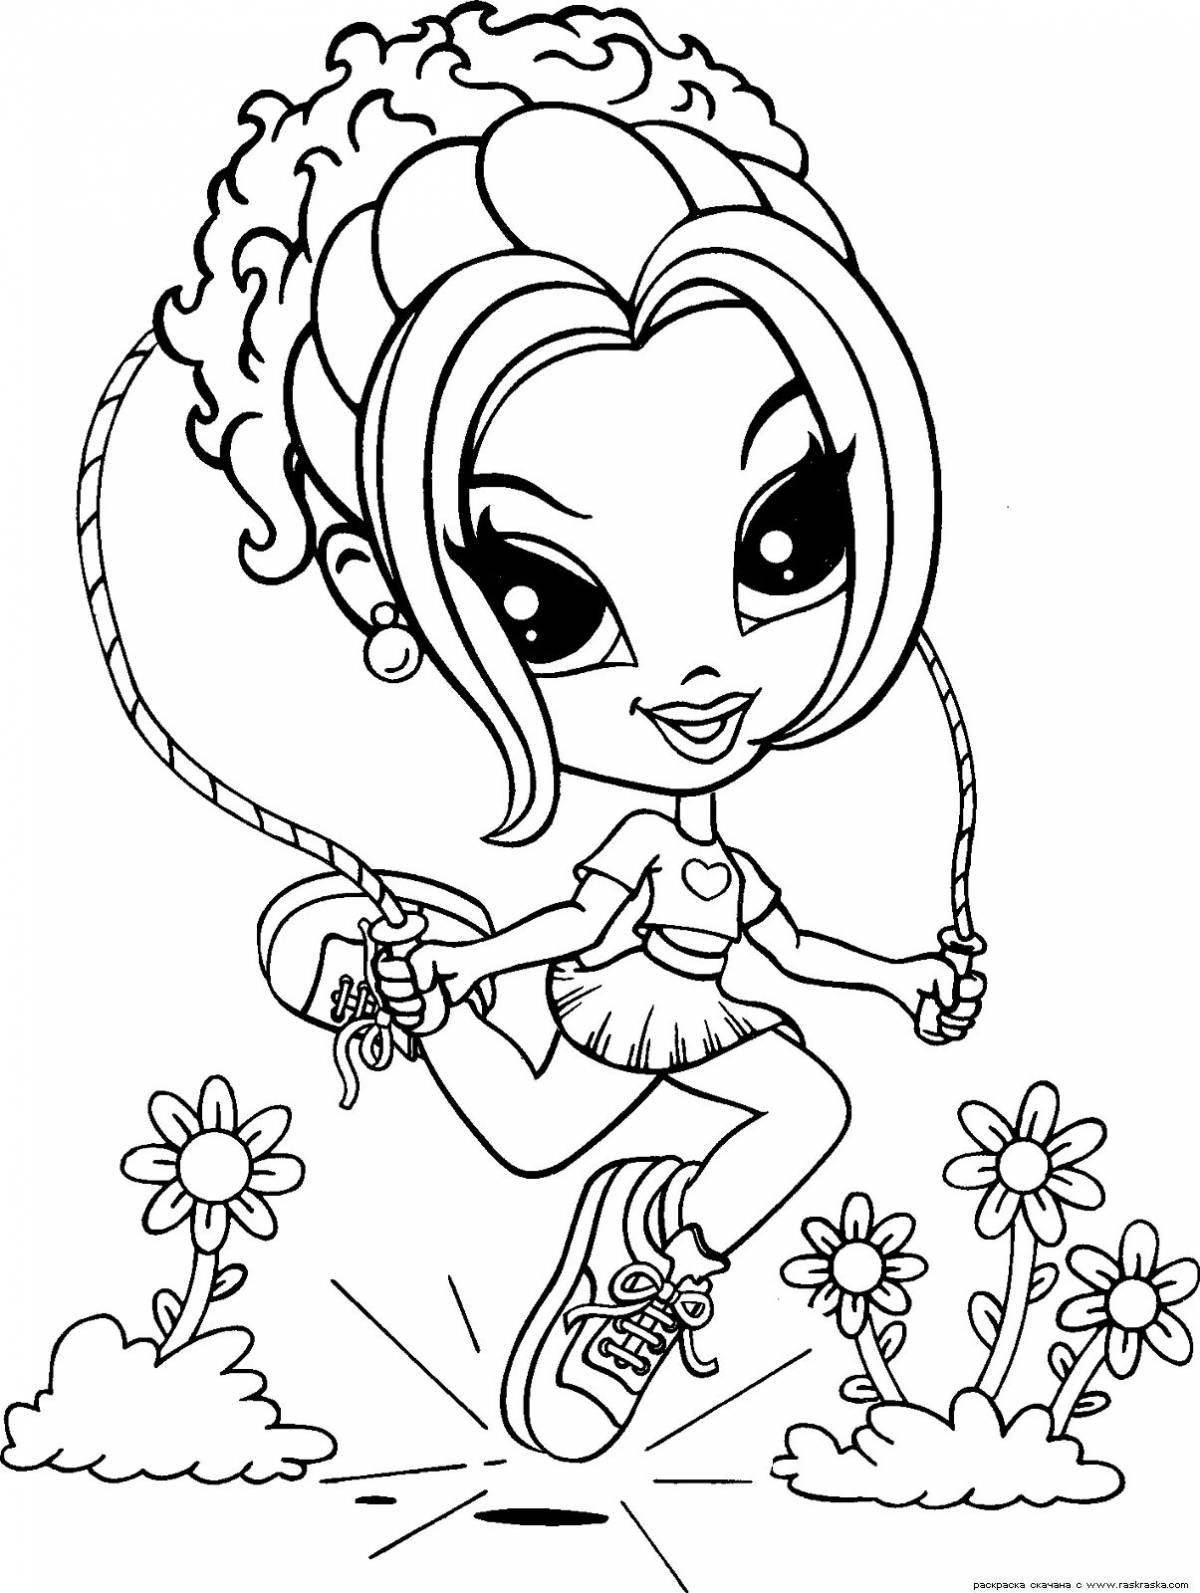 Playful coloring for girls pdf